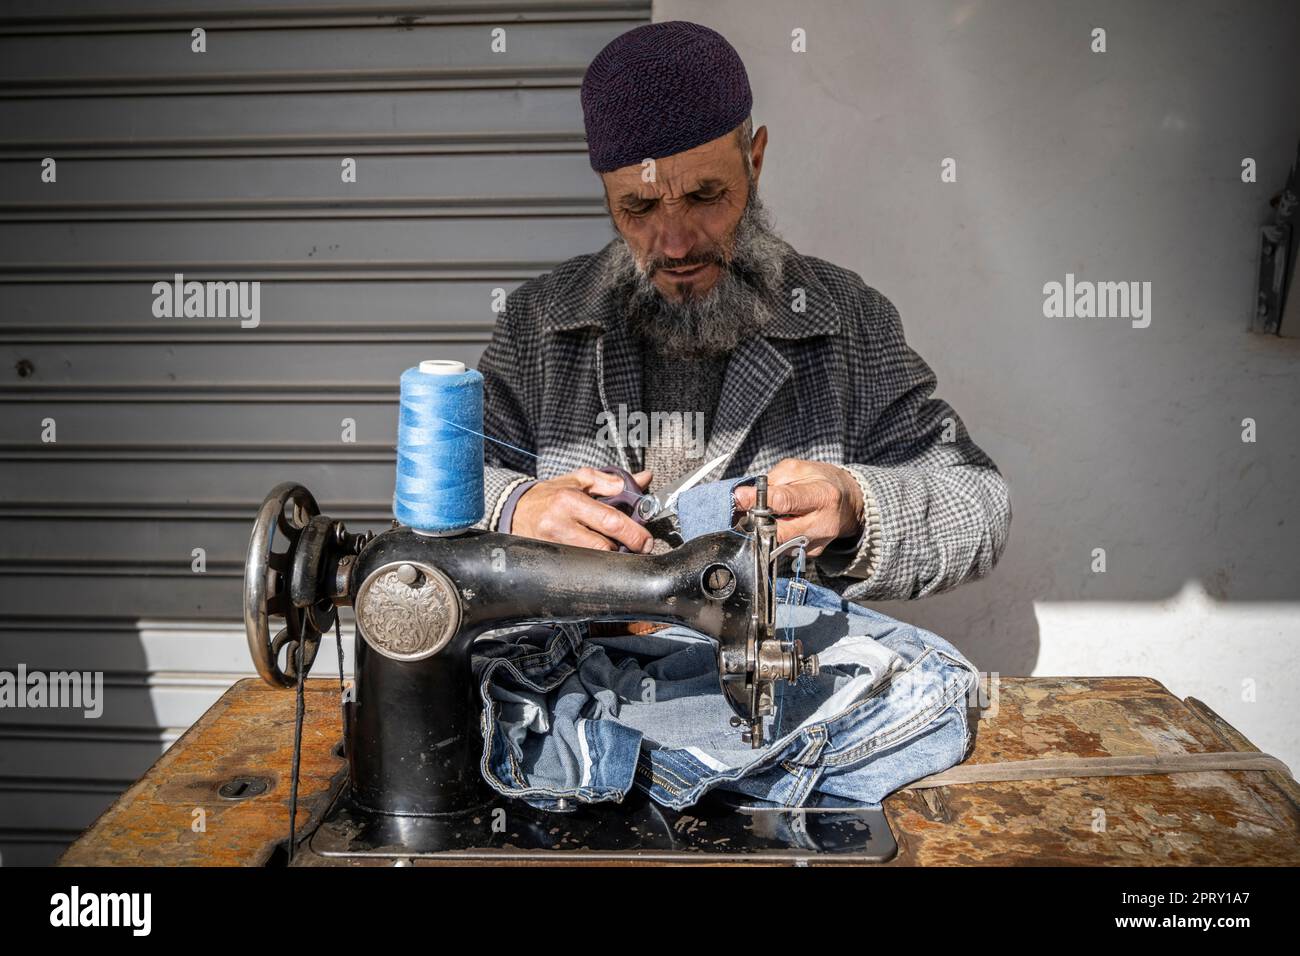 Tailor repairing clothes with his sewing machine in a street stall. Stock Photo